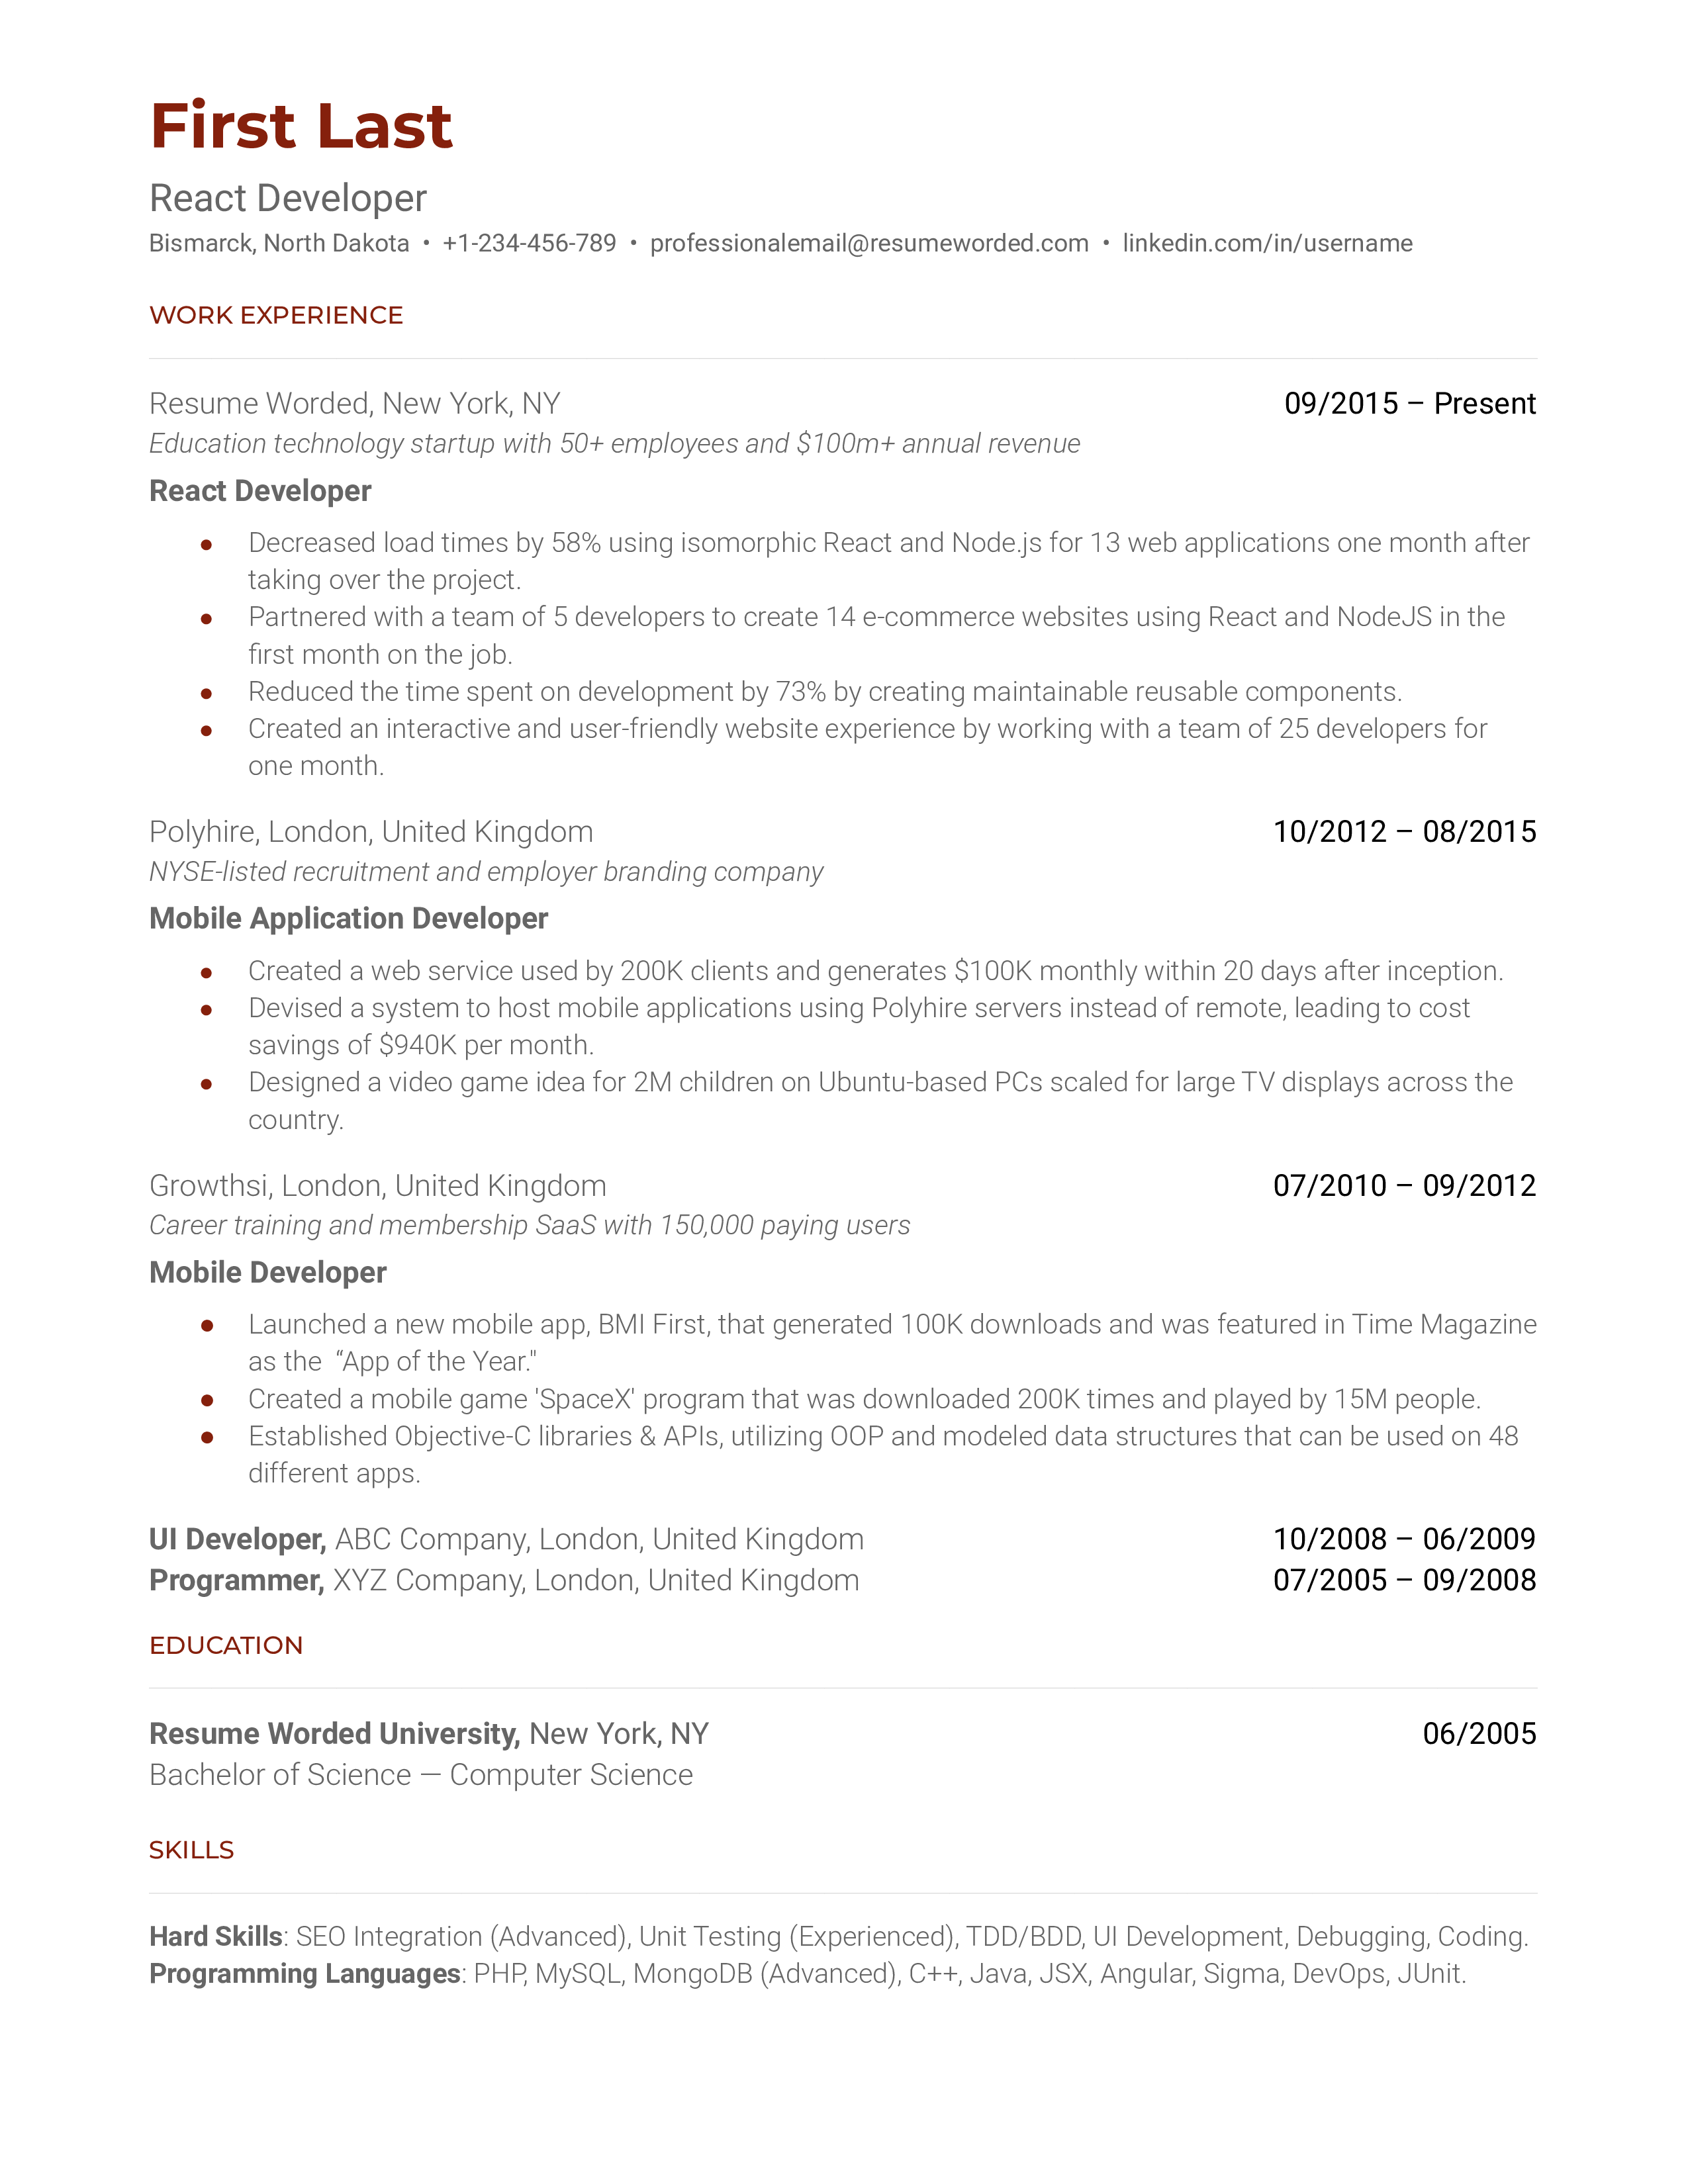 A react developer resume template that is tailored to the software development industry